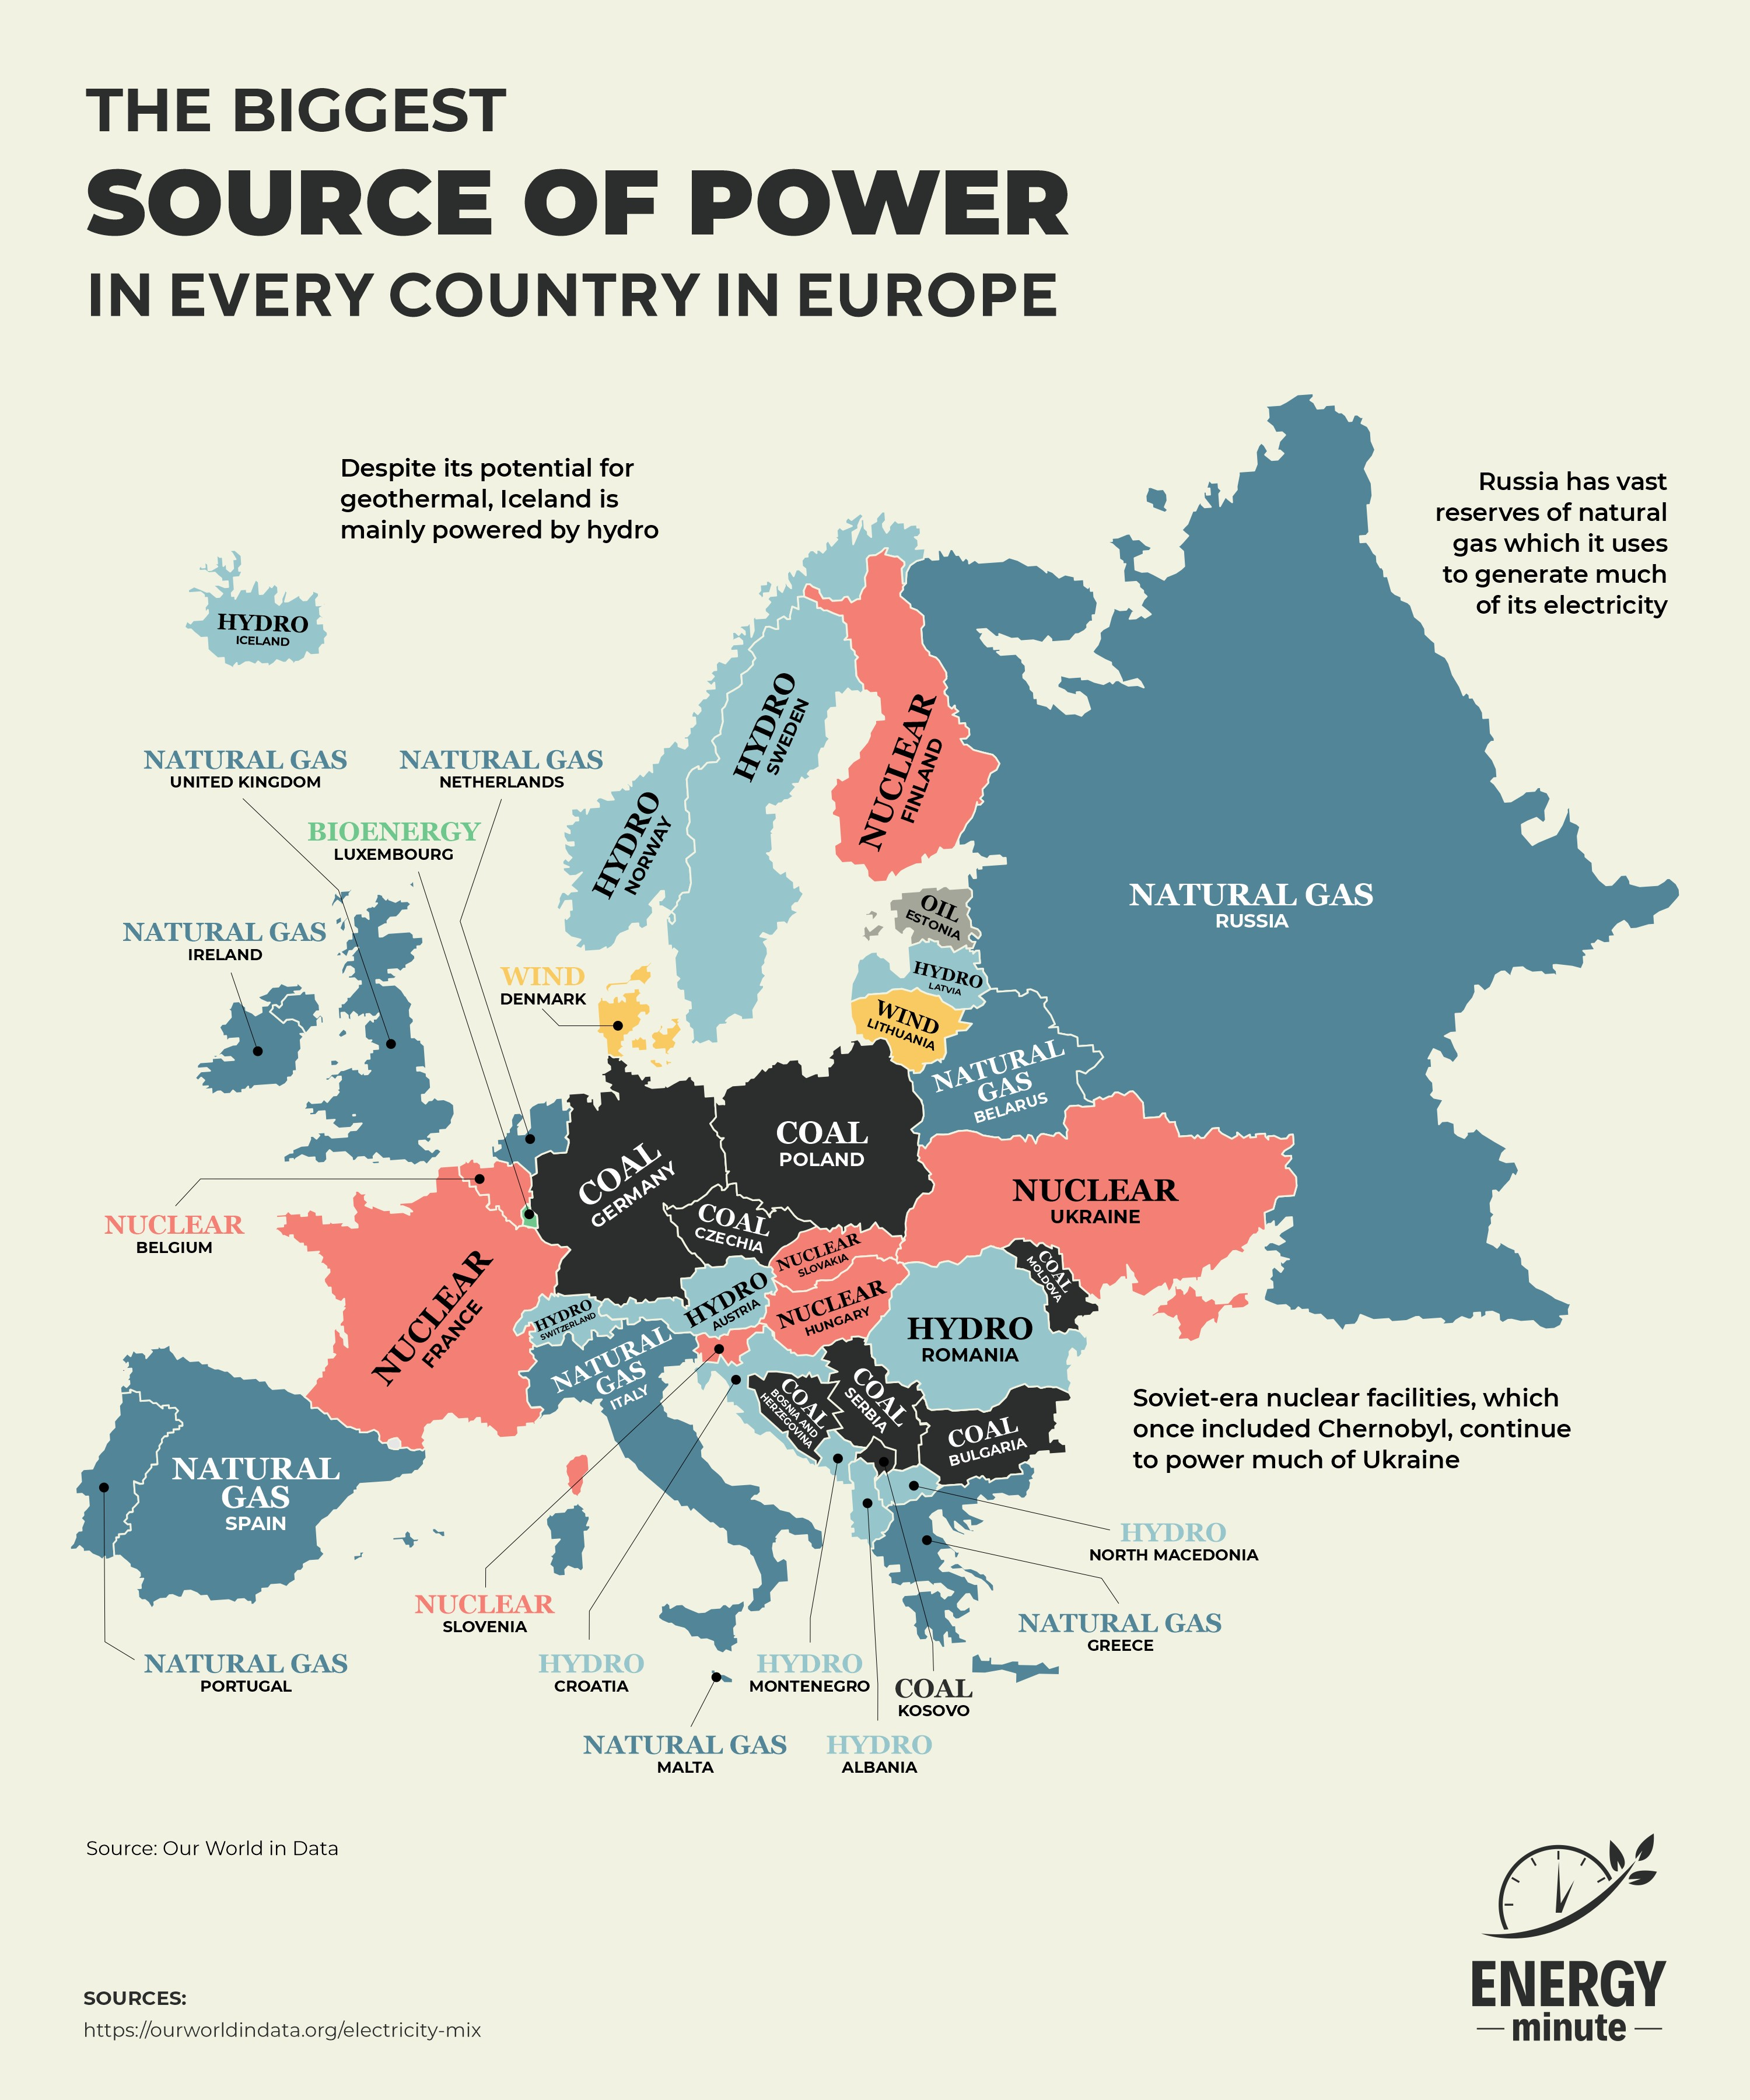 The Largest Source of Power in European Countries